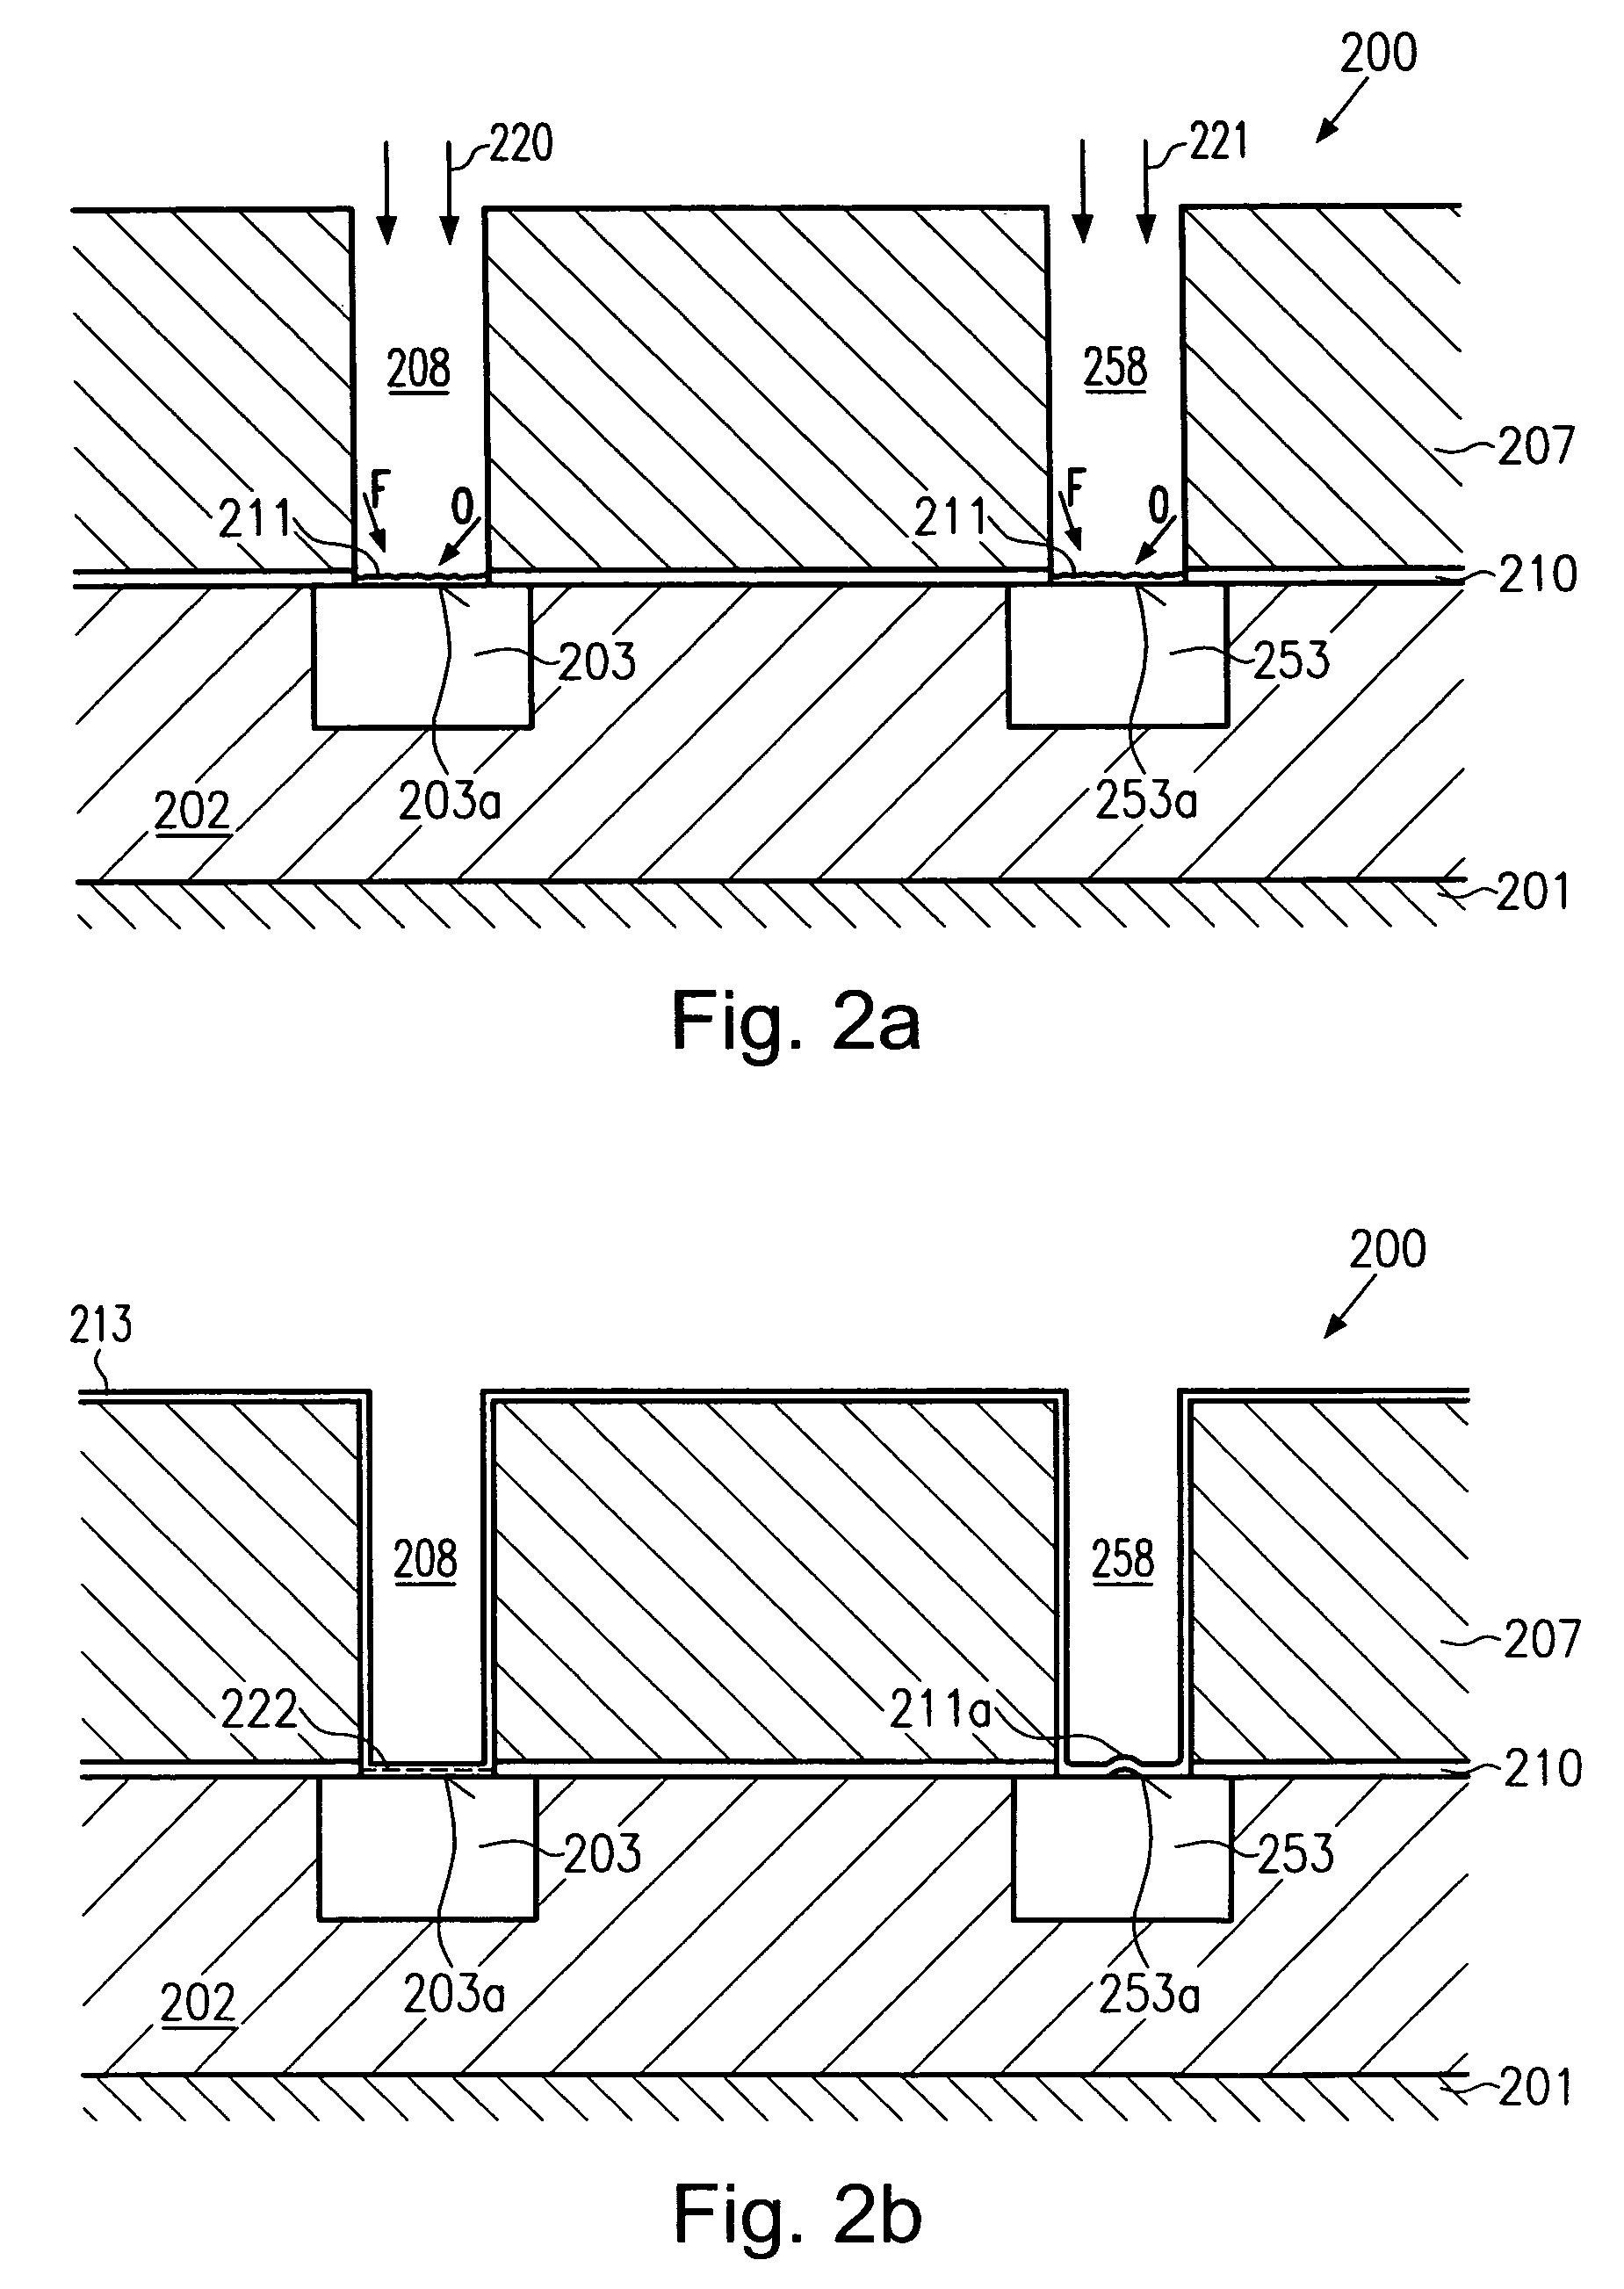 Technique for forming a passivation layer prior to depositing a barrier layer in a copper metallization layer